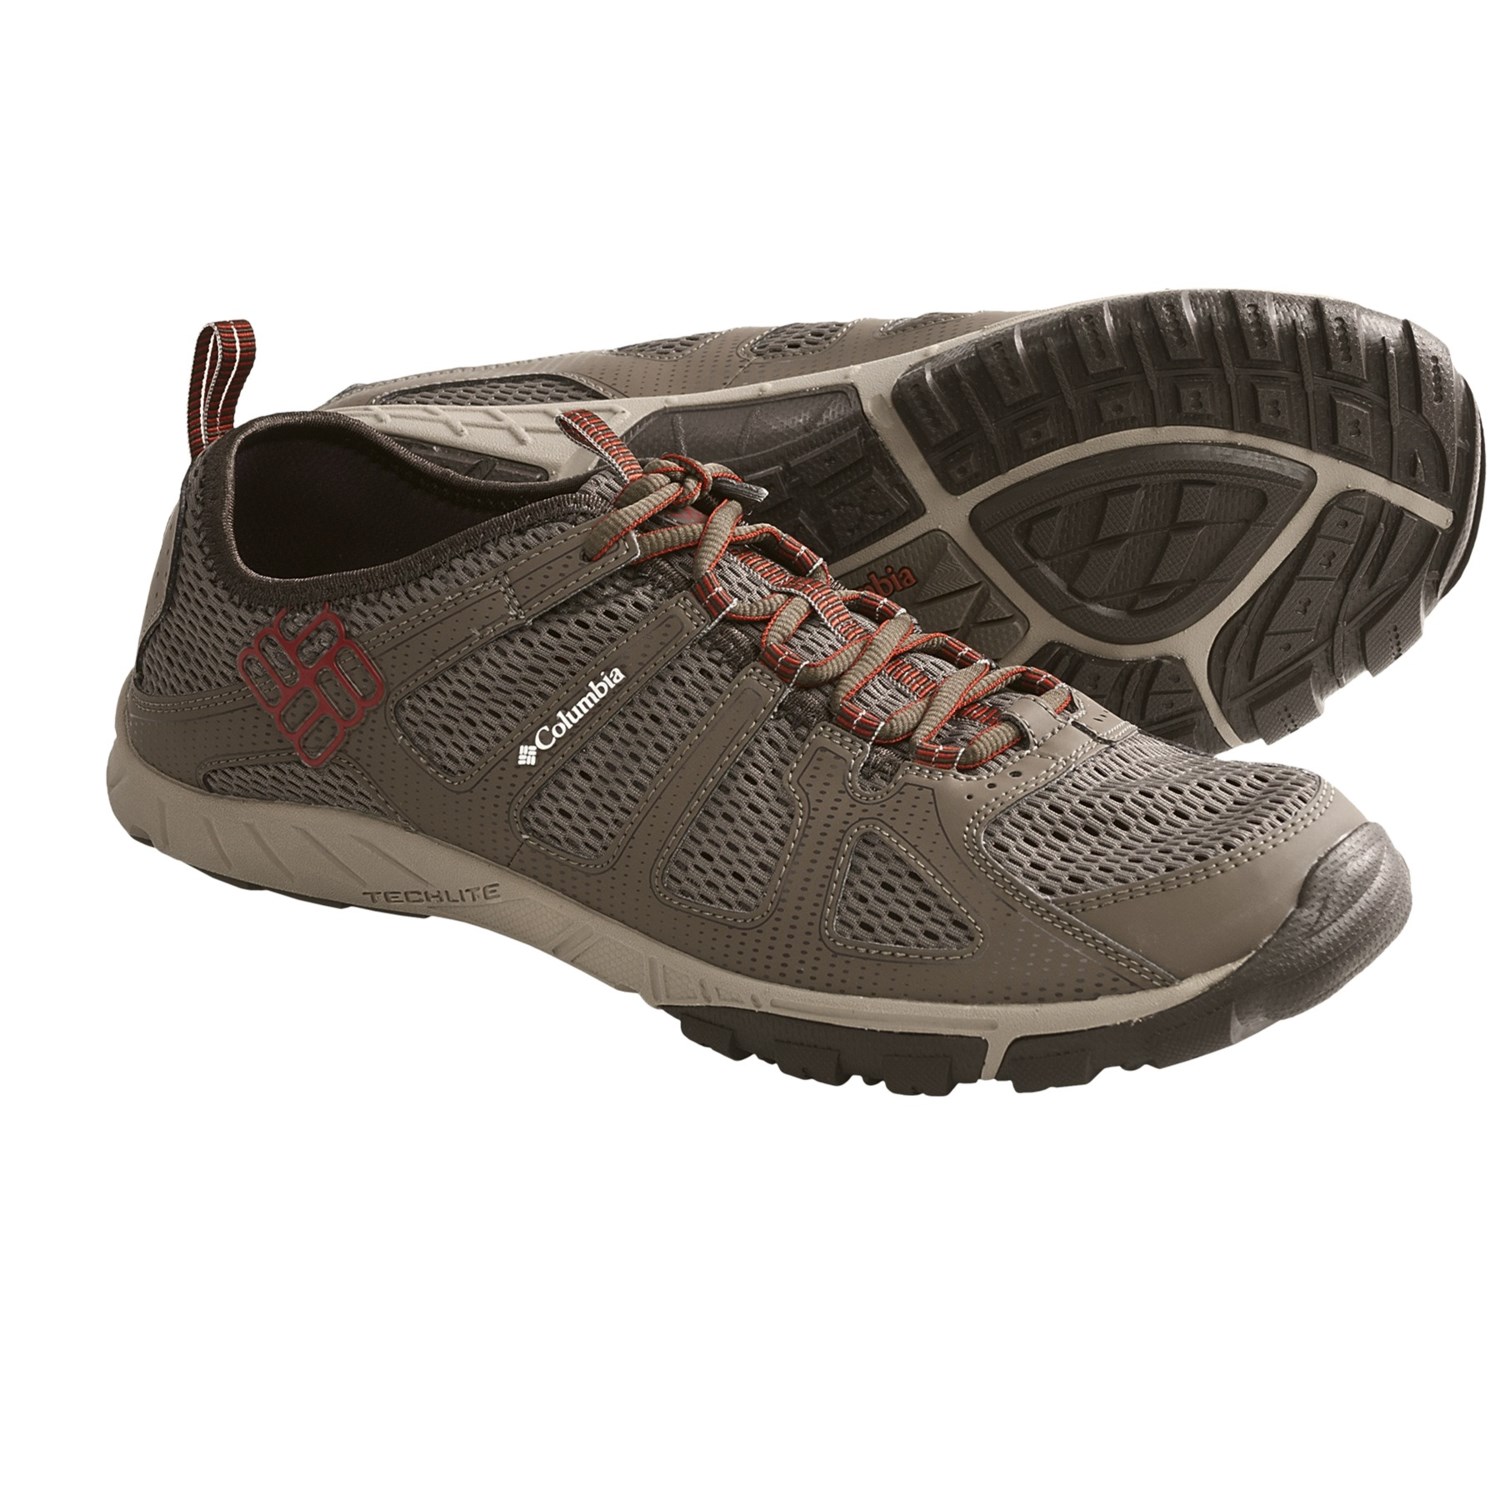 Columbia Sportswear Liquifly Shoes (For Men)